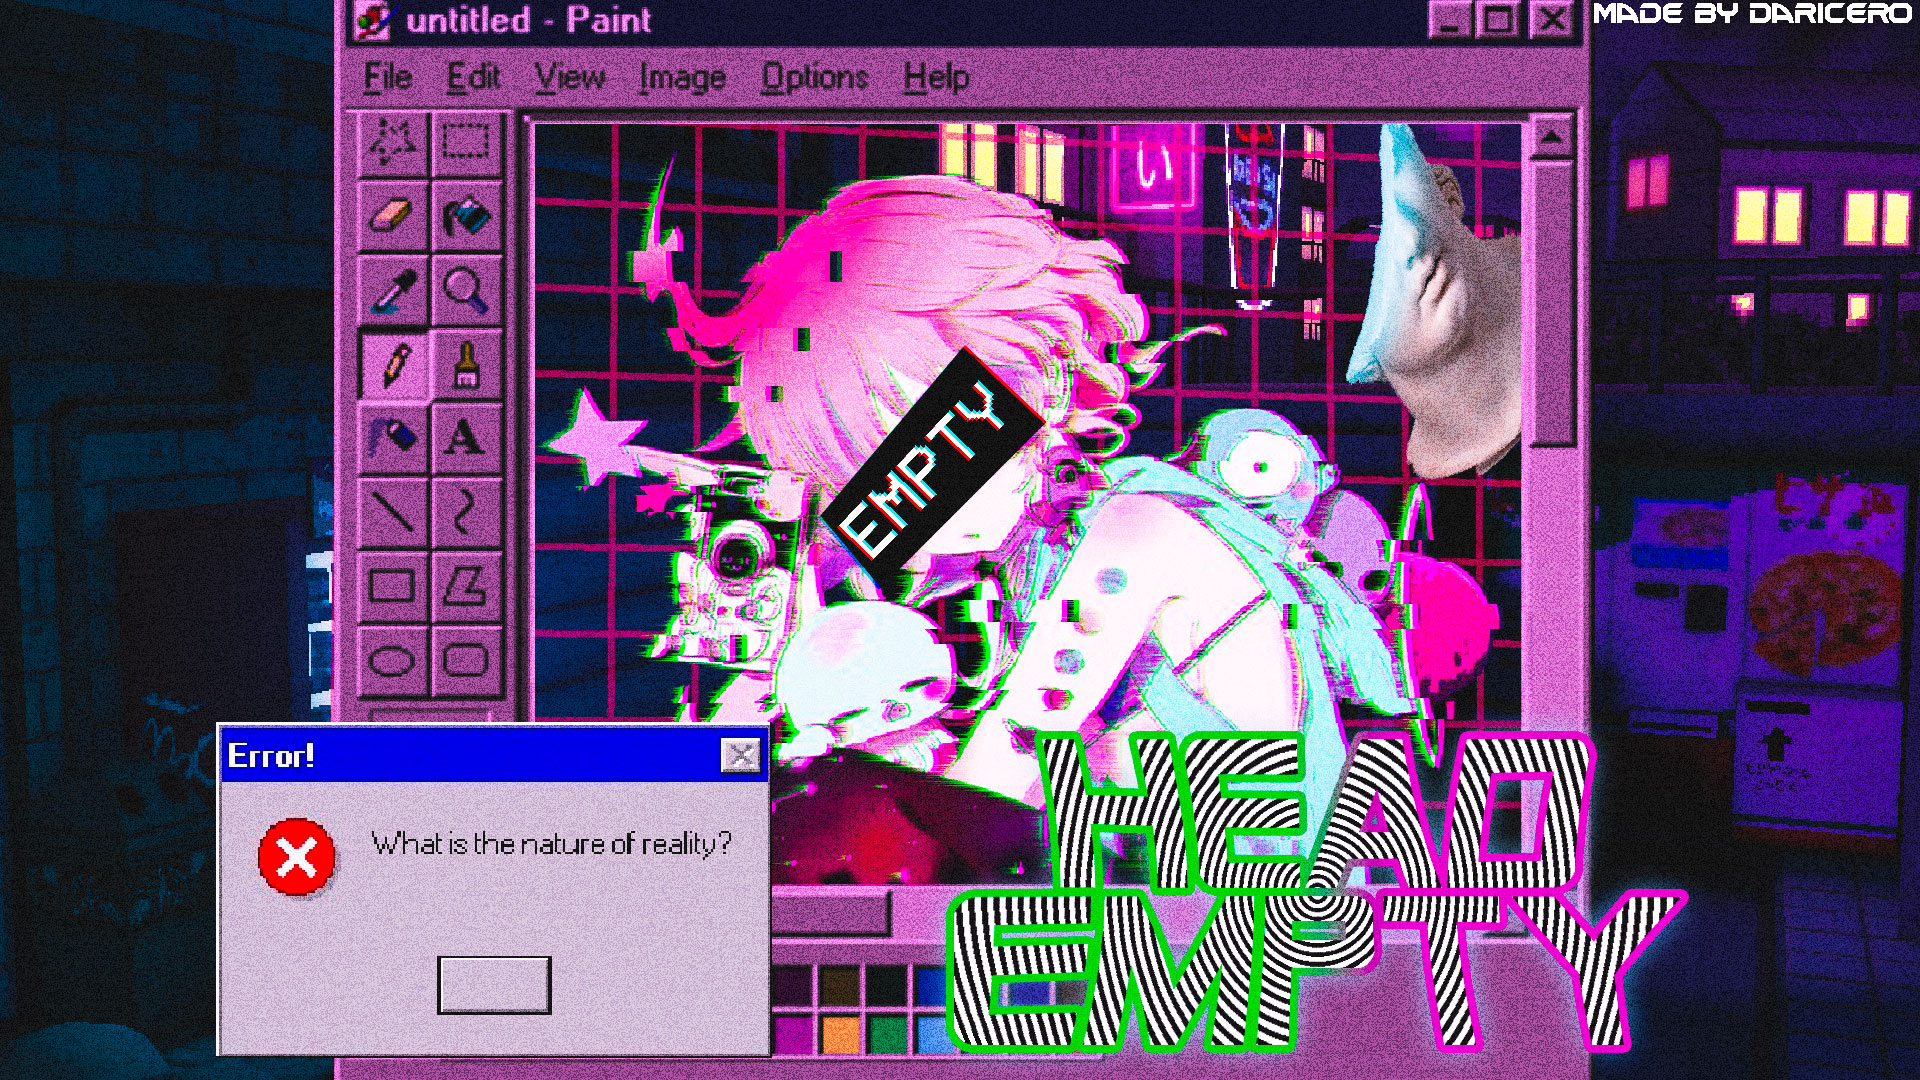 Download wallpaper girl, anime, sad, Chinese, Vaporwave, Glitch, section  style in resolution 1920x1080